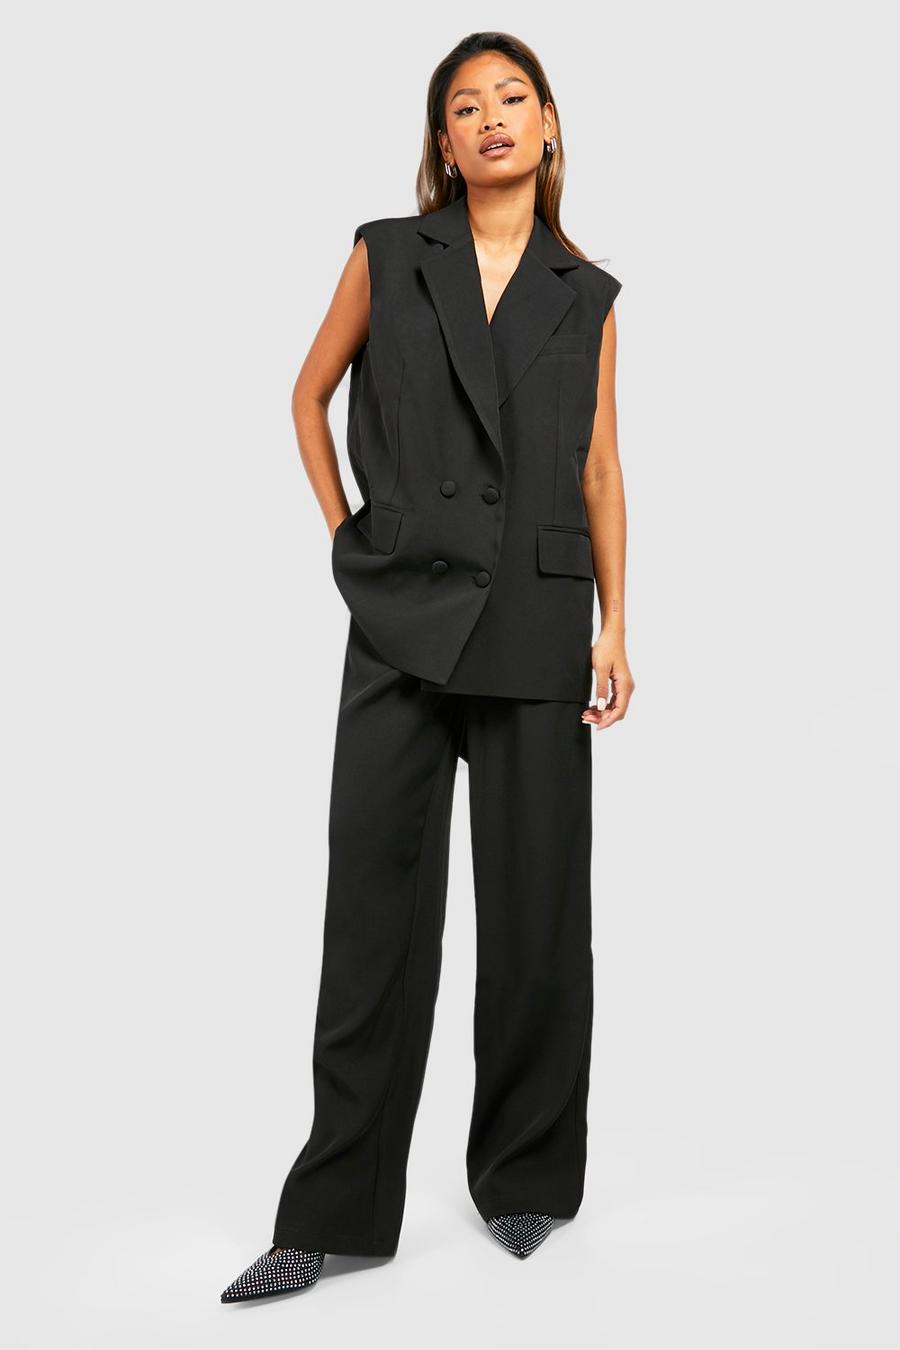 Black Pleat Front Straight Leg Tailored Trousers 